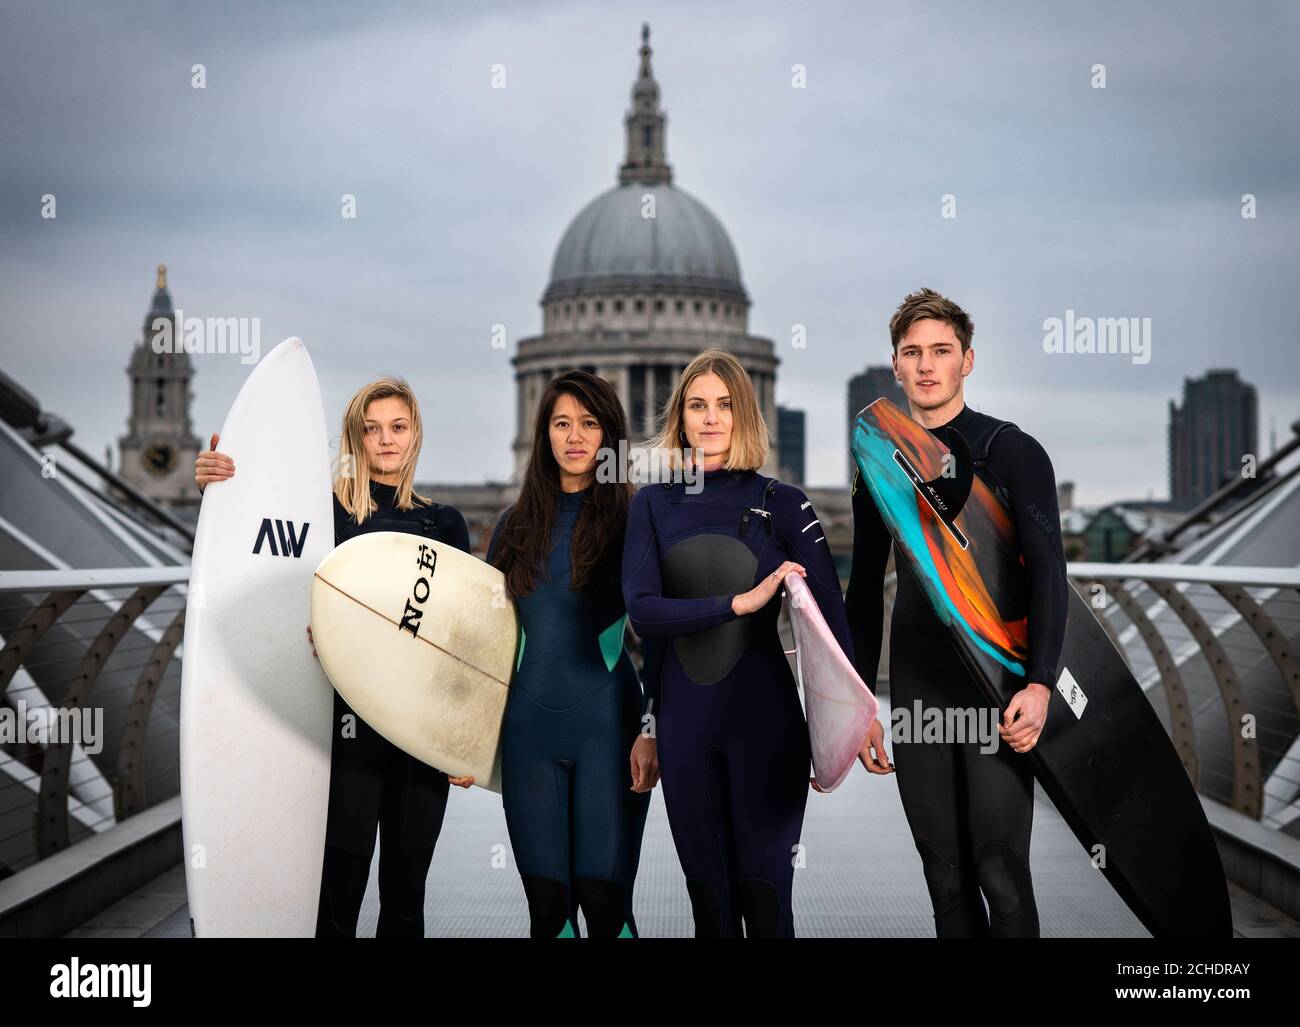 EMBARGOED TO 0001 TUESDAY NOVEMBER 27 EDITORIAL USE ONLY (Left to right) Surfers Jessica Rowe, Veranika Lim, Sophie Hellyer and Frank Hodgson cross London&Otilde;s Millennium Bridge as a partnership is announced between Lee Valley Regional Park Authority and The Wave to create an inland surfing destination in the capital for people of all ages, backgrounds and abilities.  Stock Photo